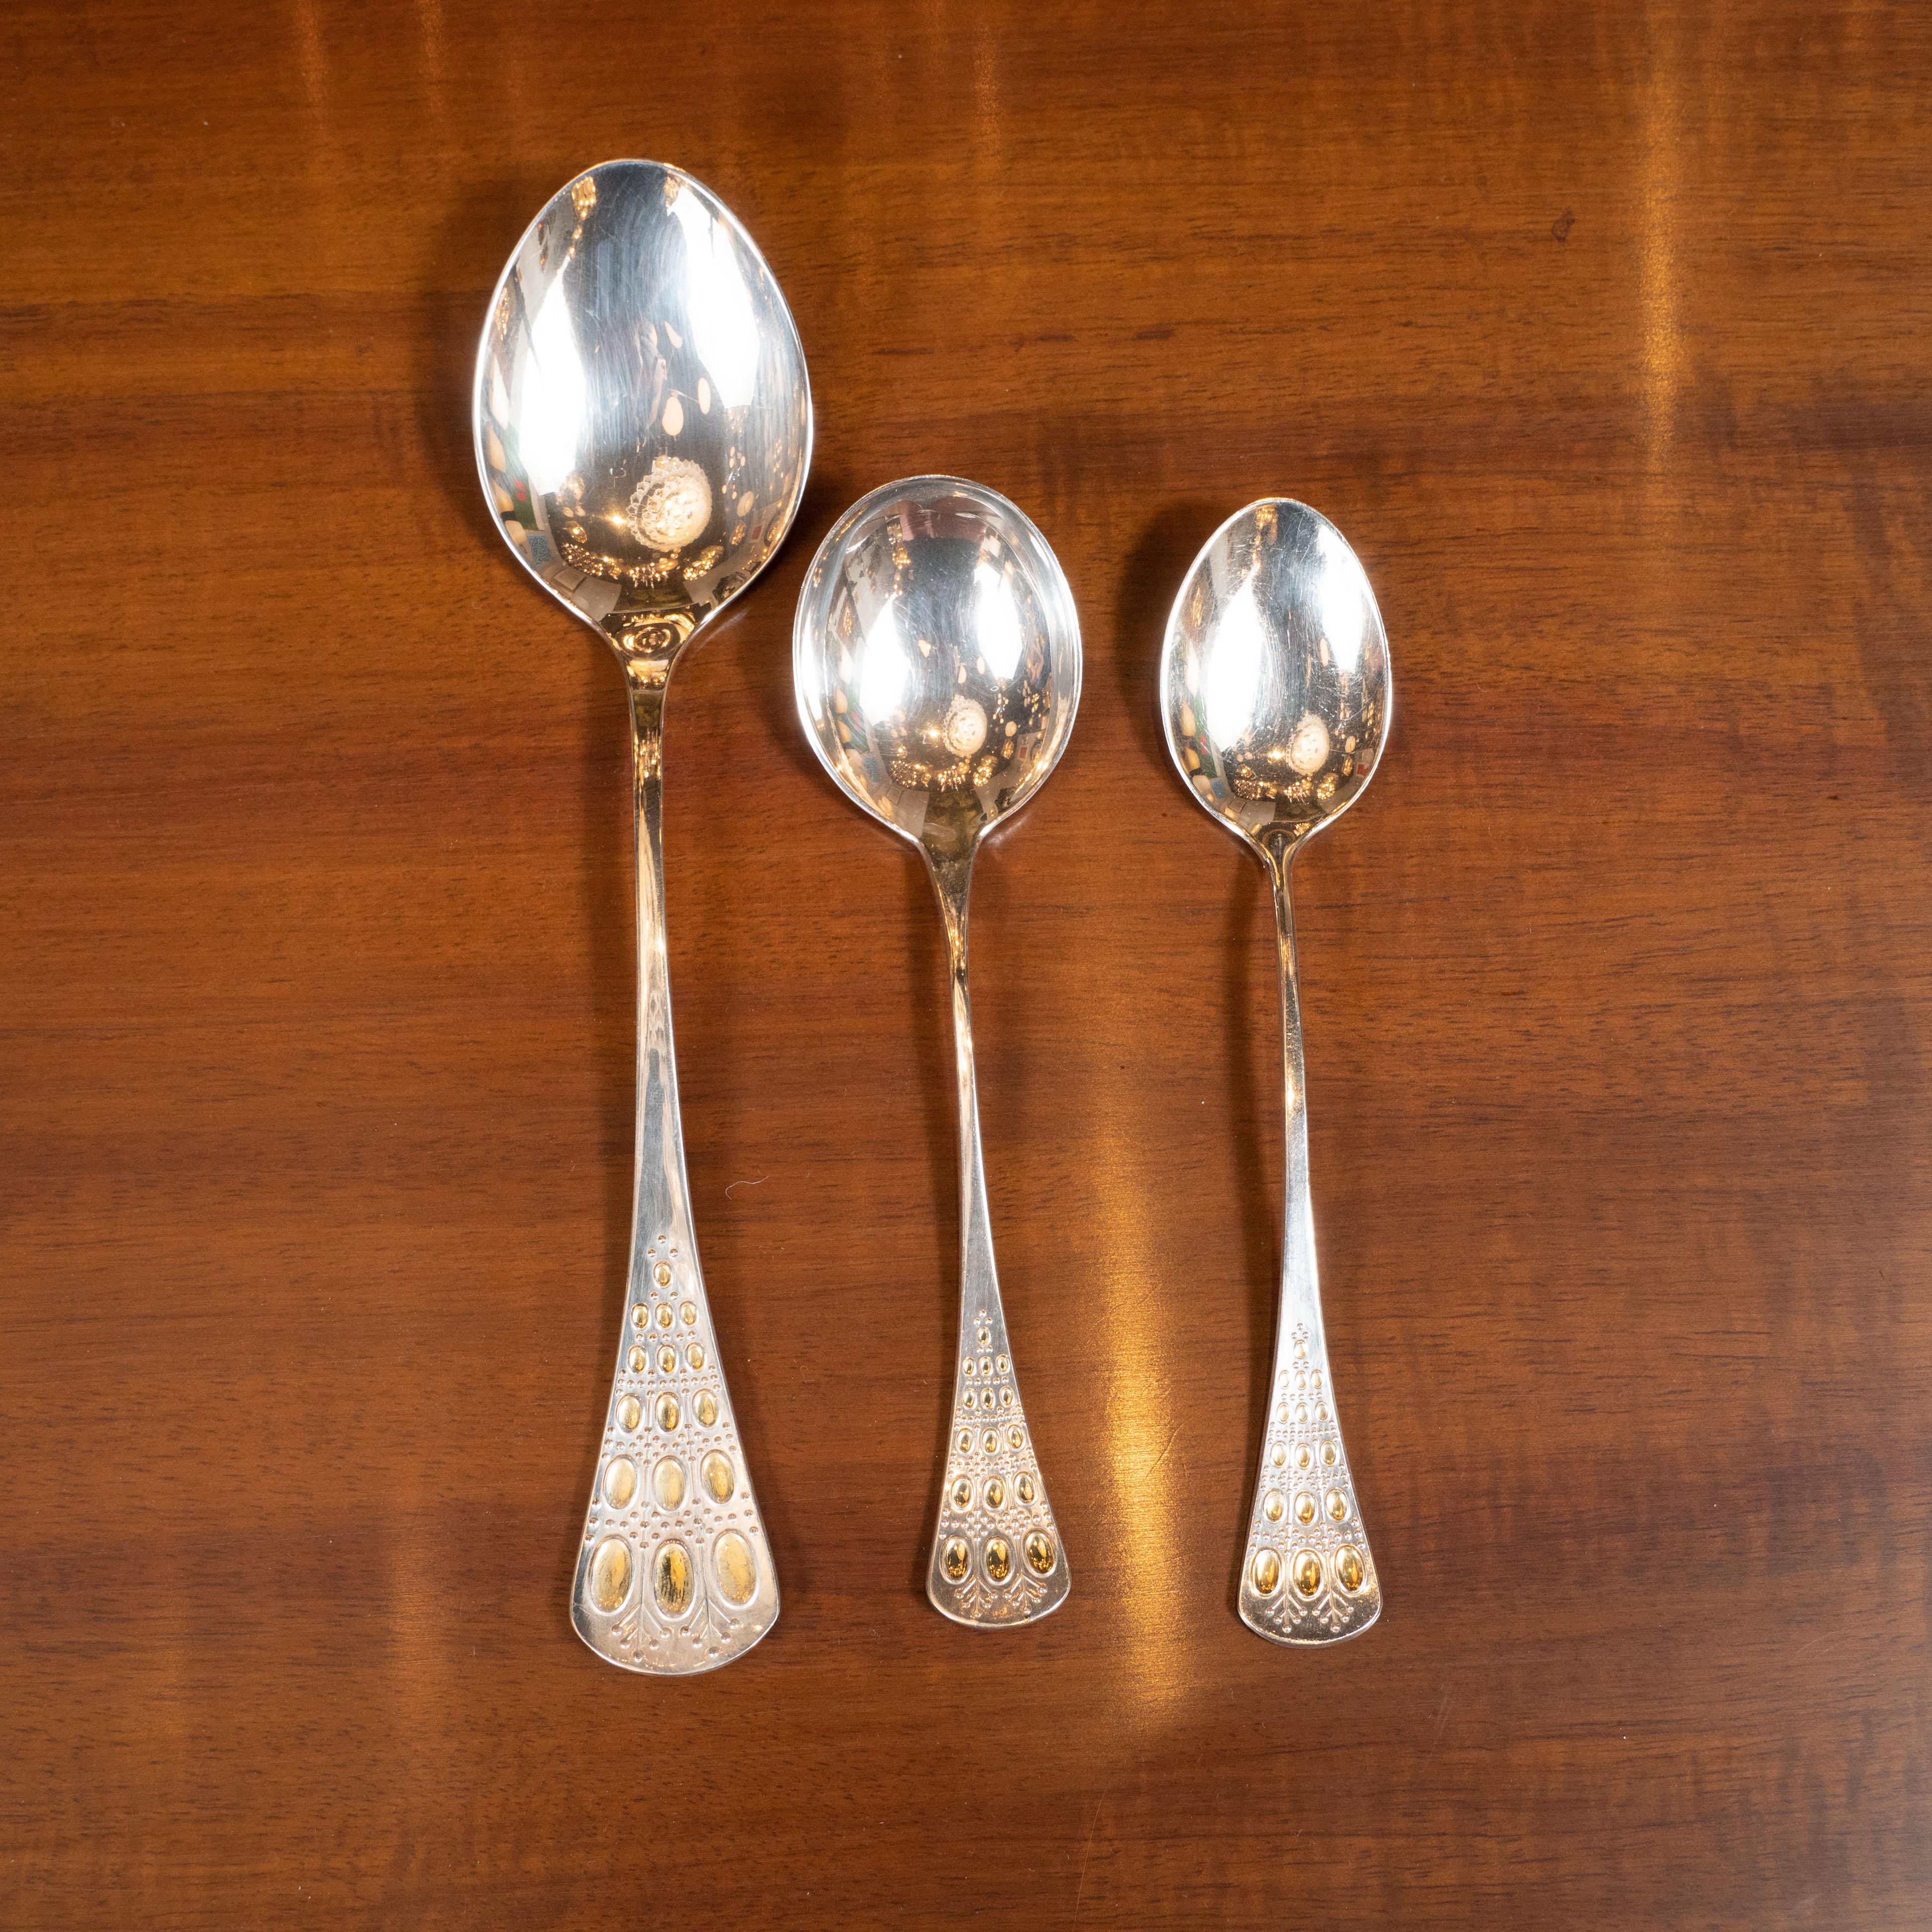 This sterling silver flatware service for eight was designed by the Bjørn Wiinbald for Rosenthal in 1962. Wiinbald began his career in Denmark as a ceramicist and quickly became well-known for his brightly colored work, which often features